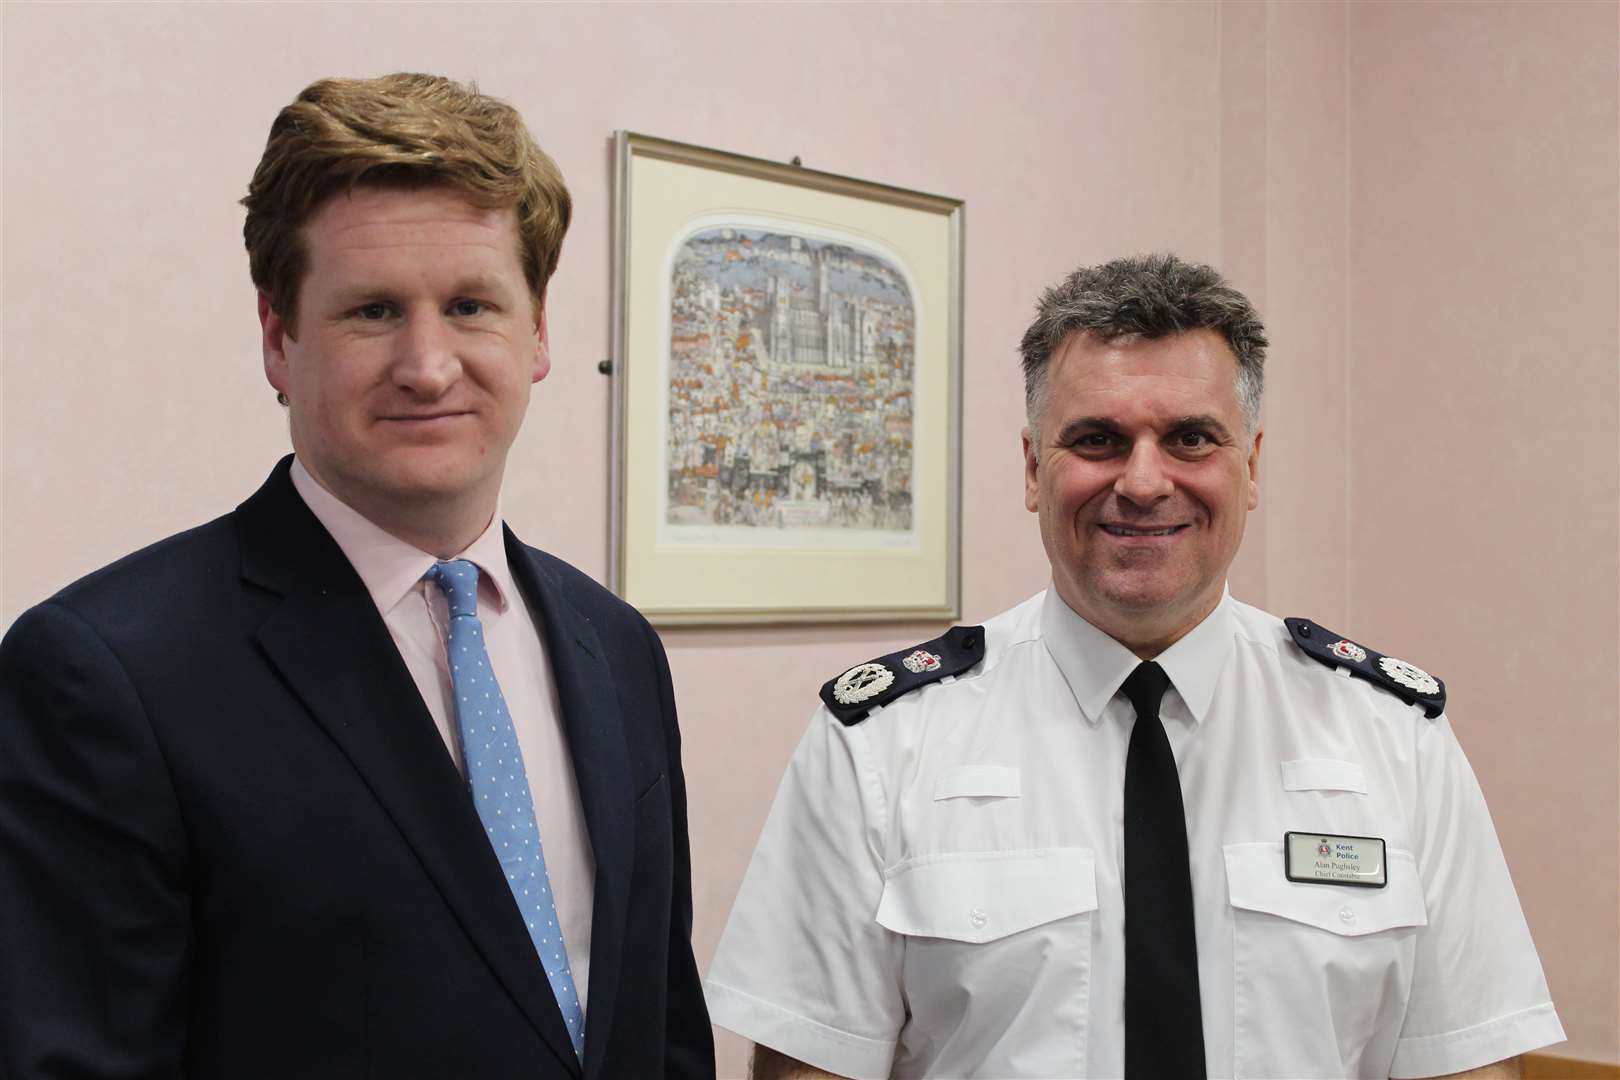 Crime Commissioner Matthew Scott with former Chief Constable Alan Pughsley